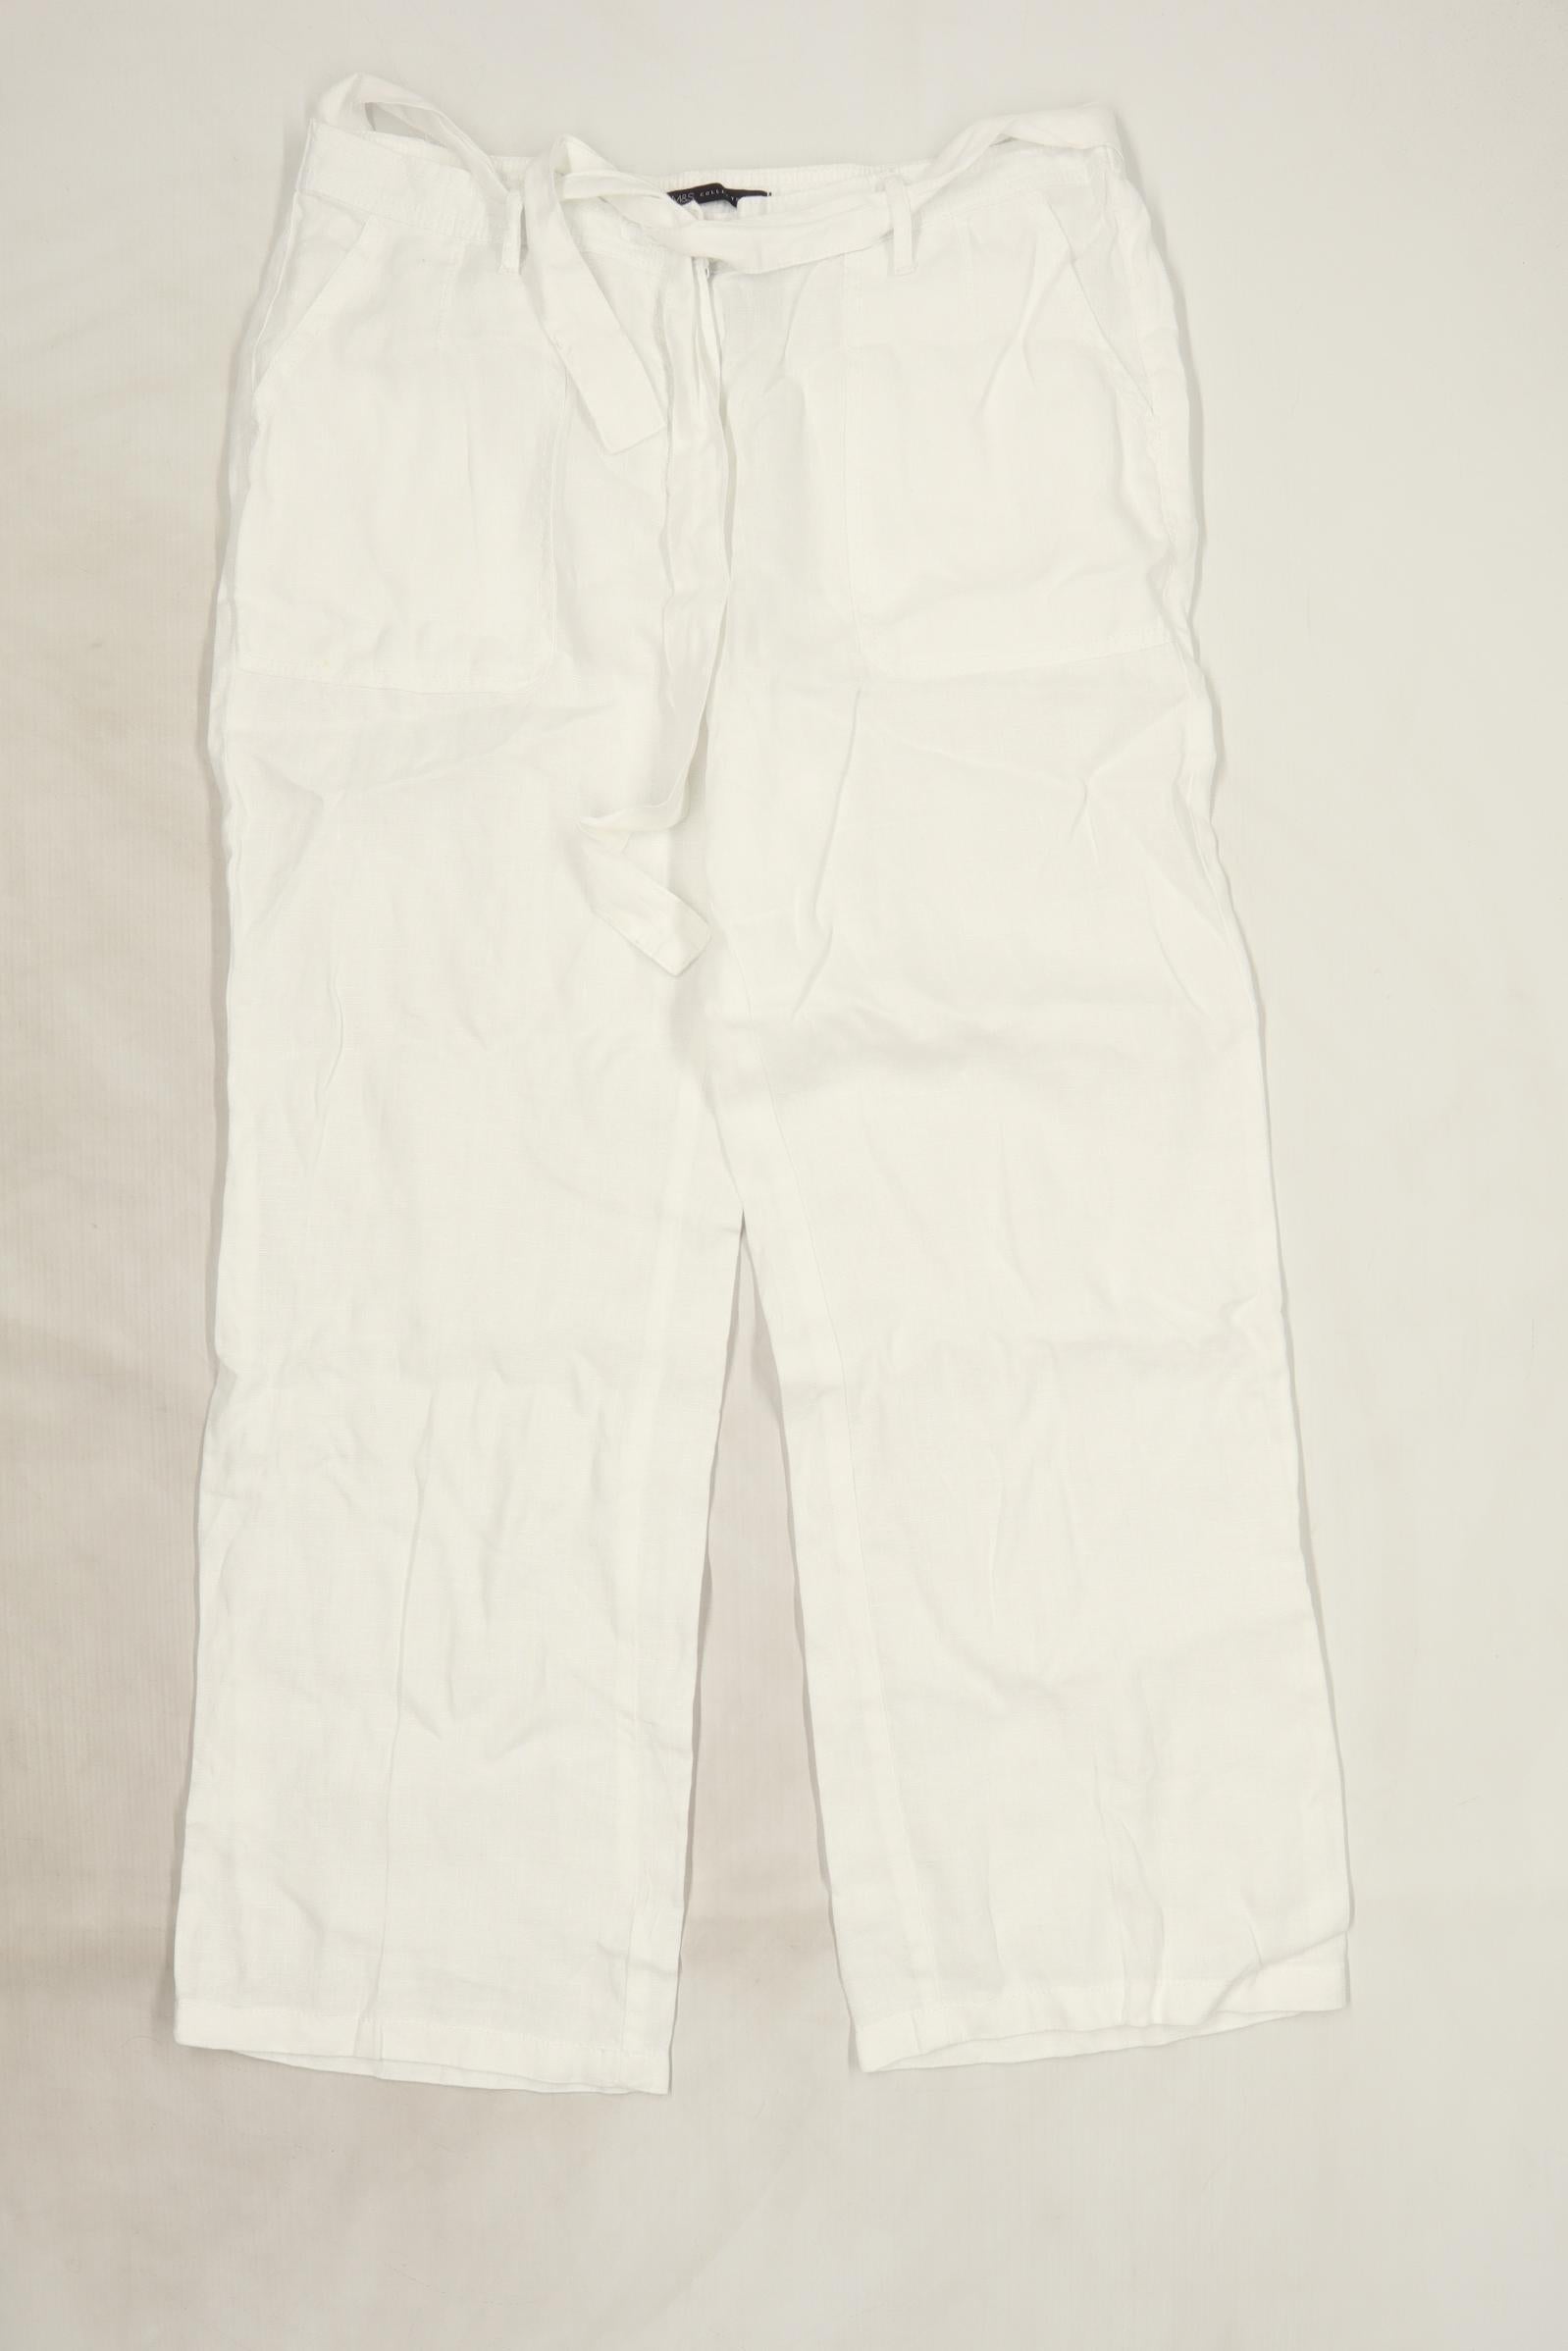 Marks  Spencer Trousers and Pants  Buy Marks  Spencer White Cotton Mix  Slim Fit Cropped Trouser Online  Nykaa Fashion